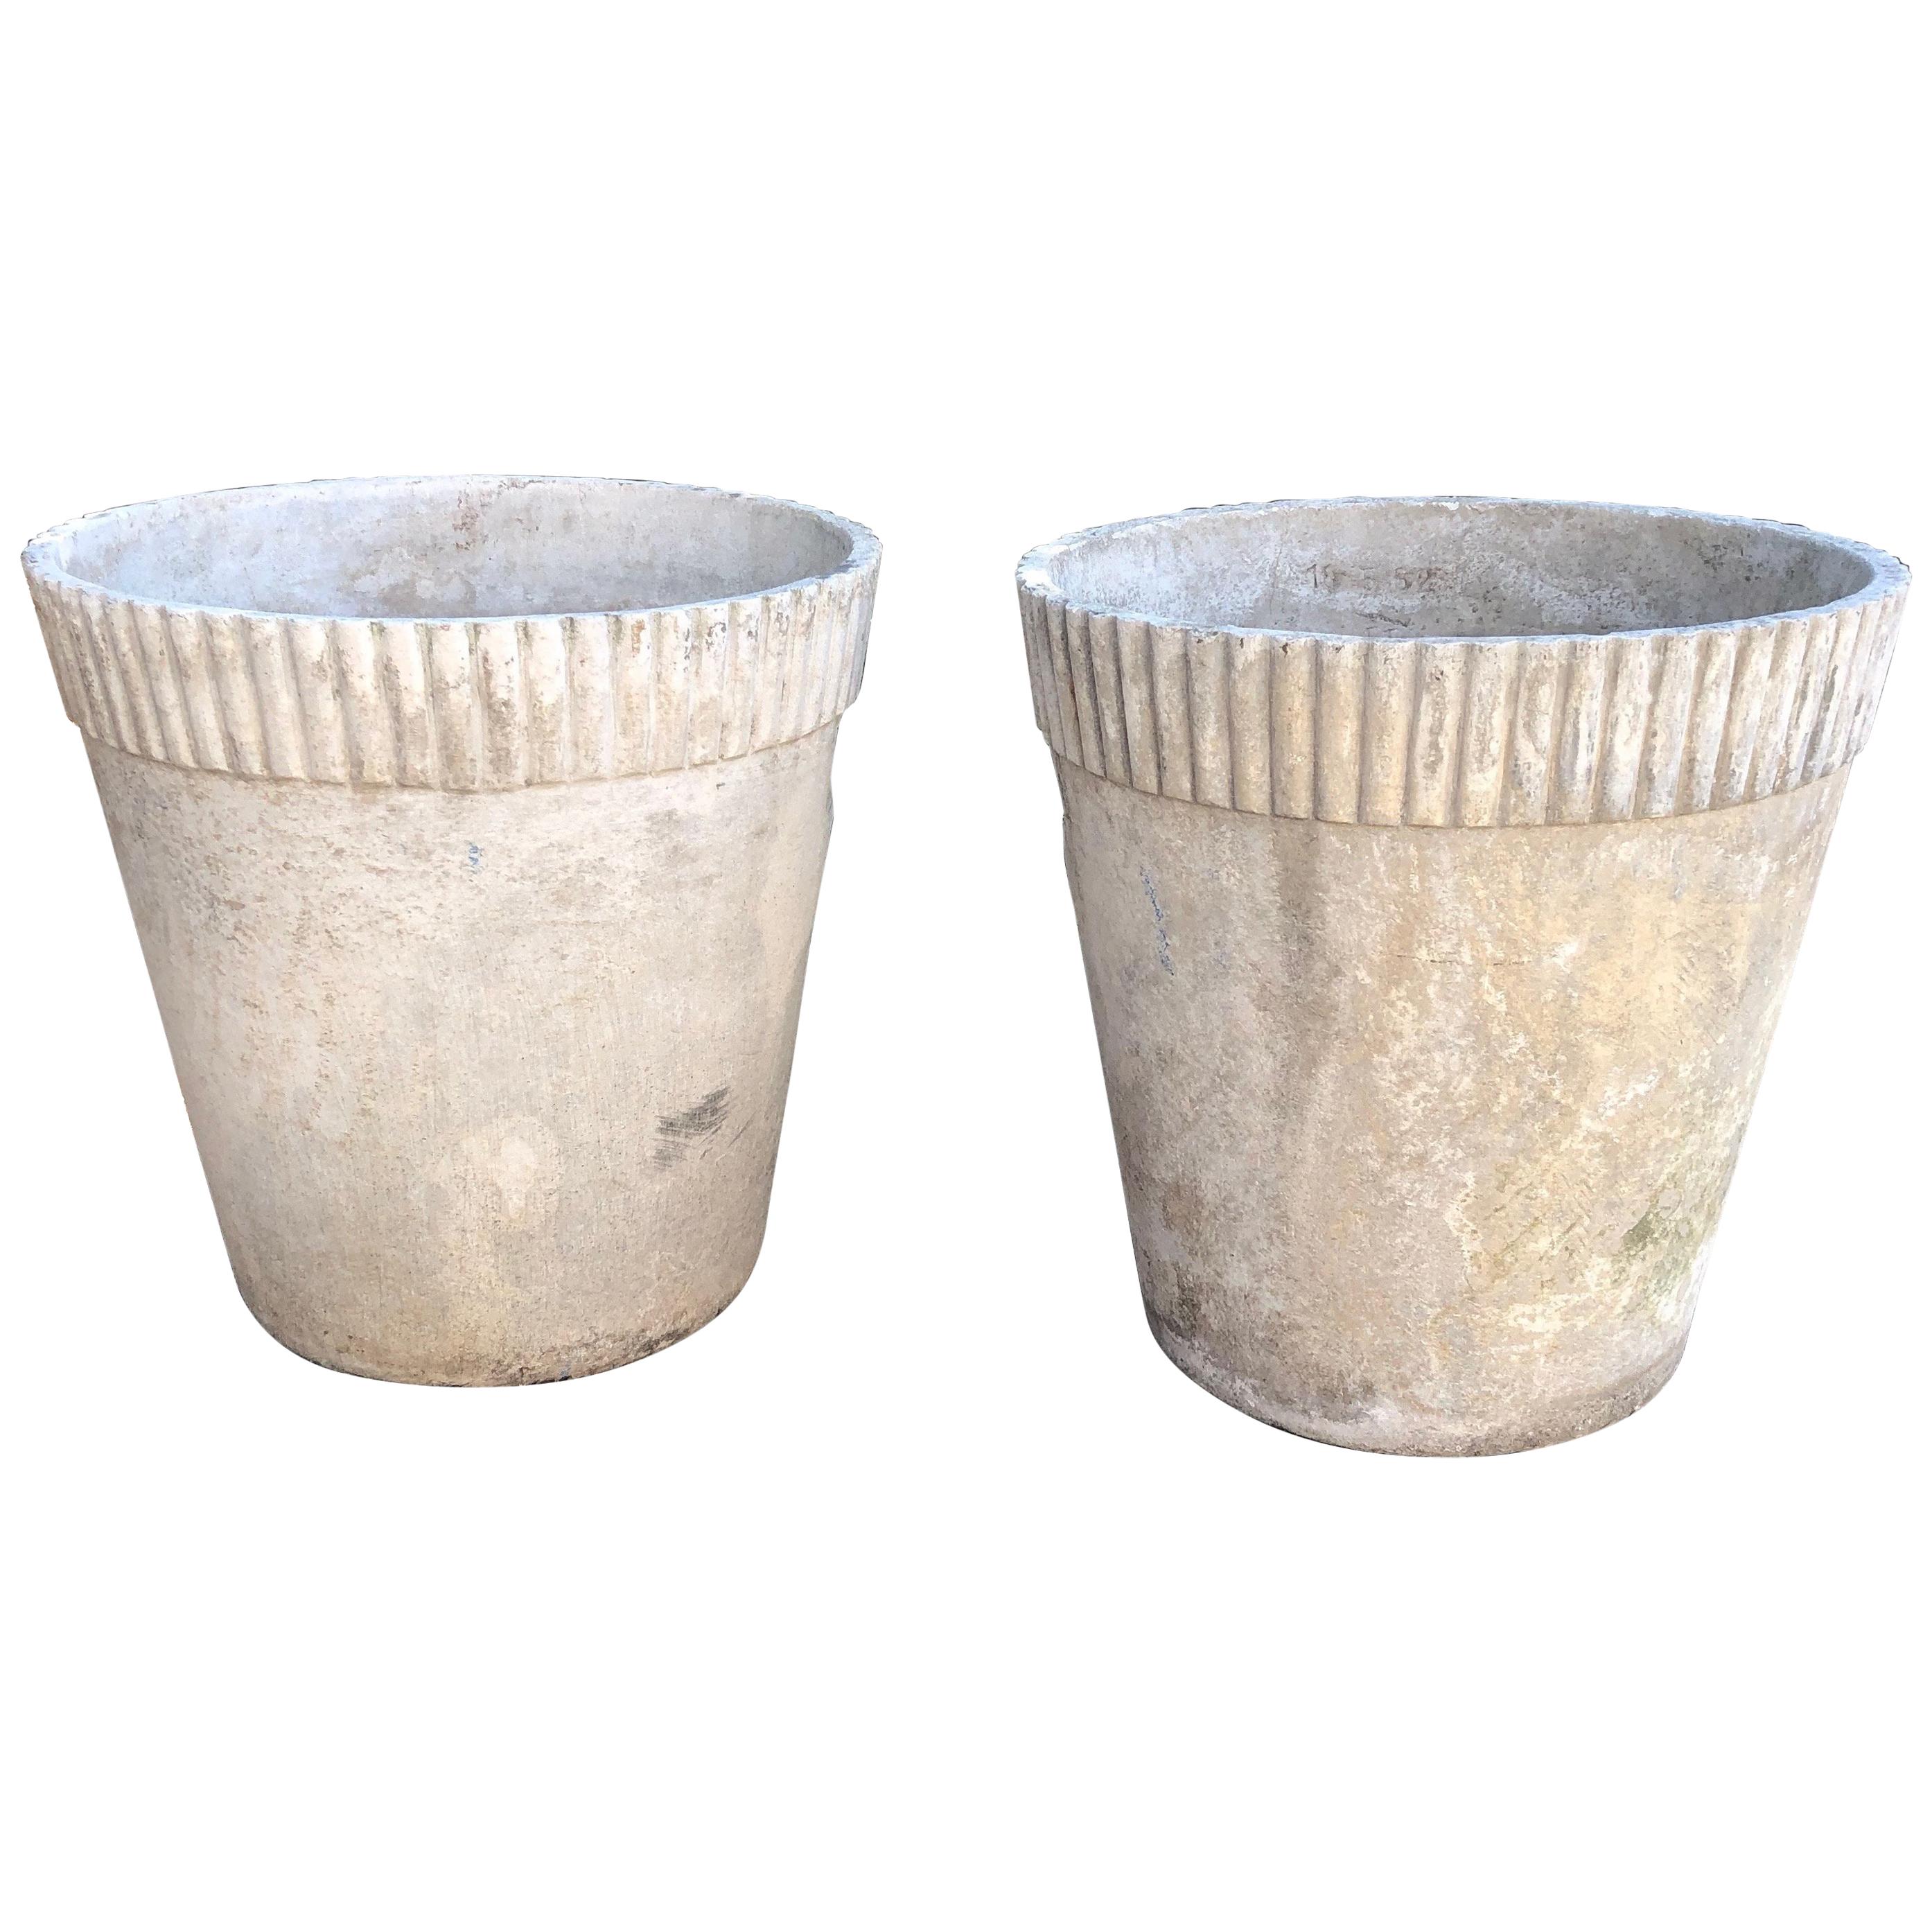 Pair of Large Flower Pot Form Planters Designed by Willy Guhl, Dated 1960